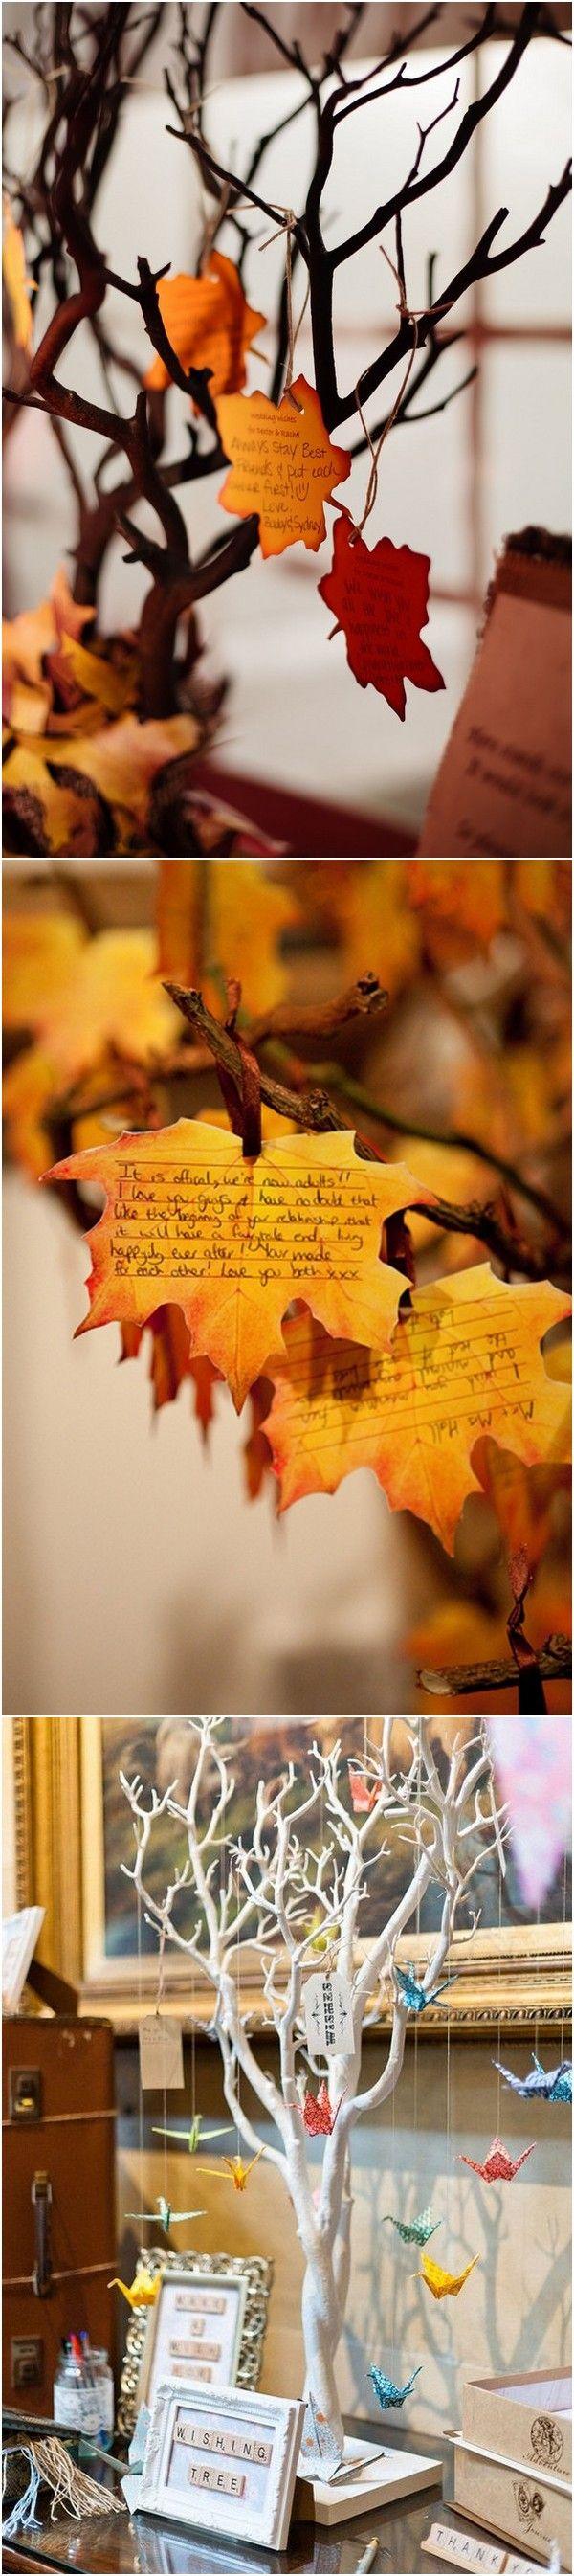 Wedding - Top 10 Wishing Tree Decoration Ideas For Your Wedding Day - Page 2 Of 2